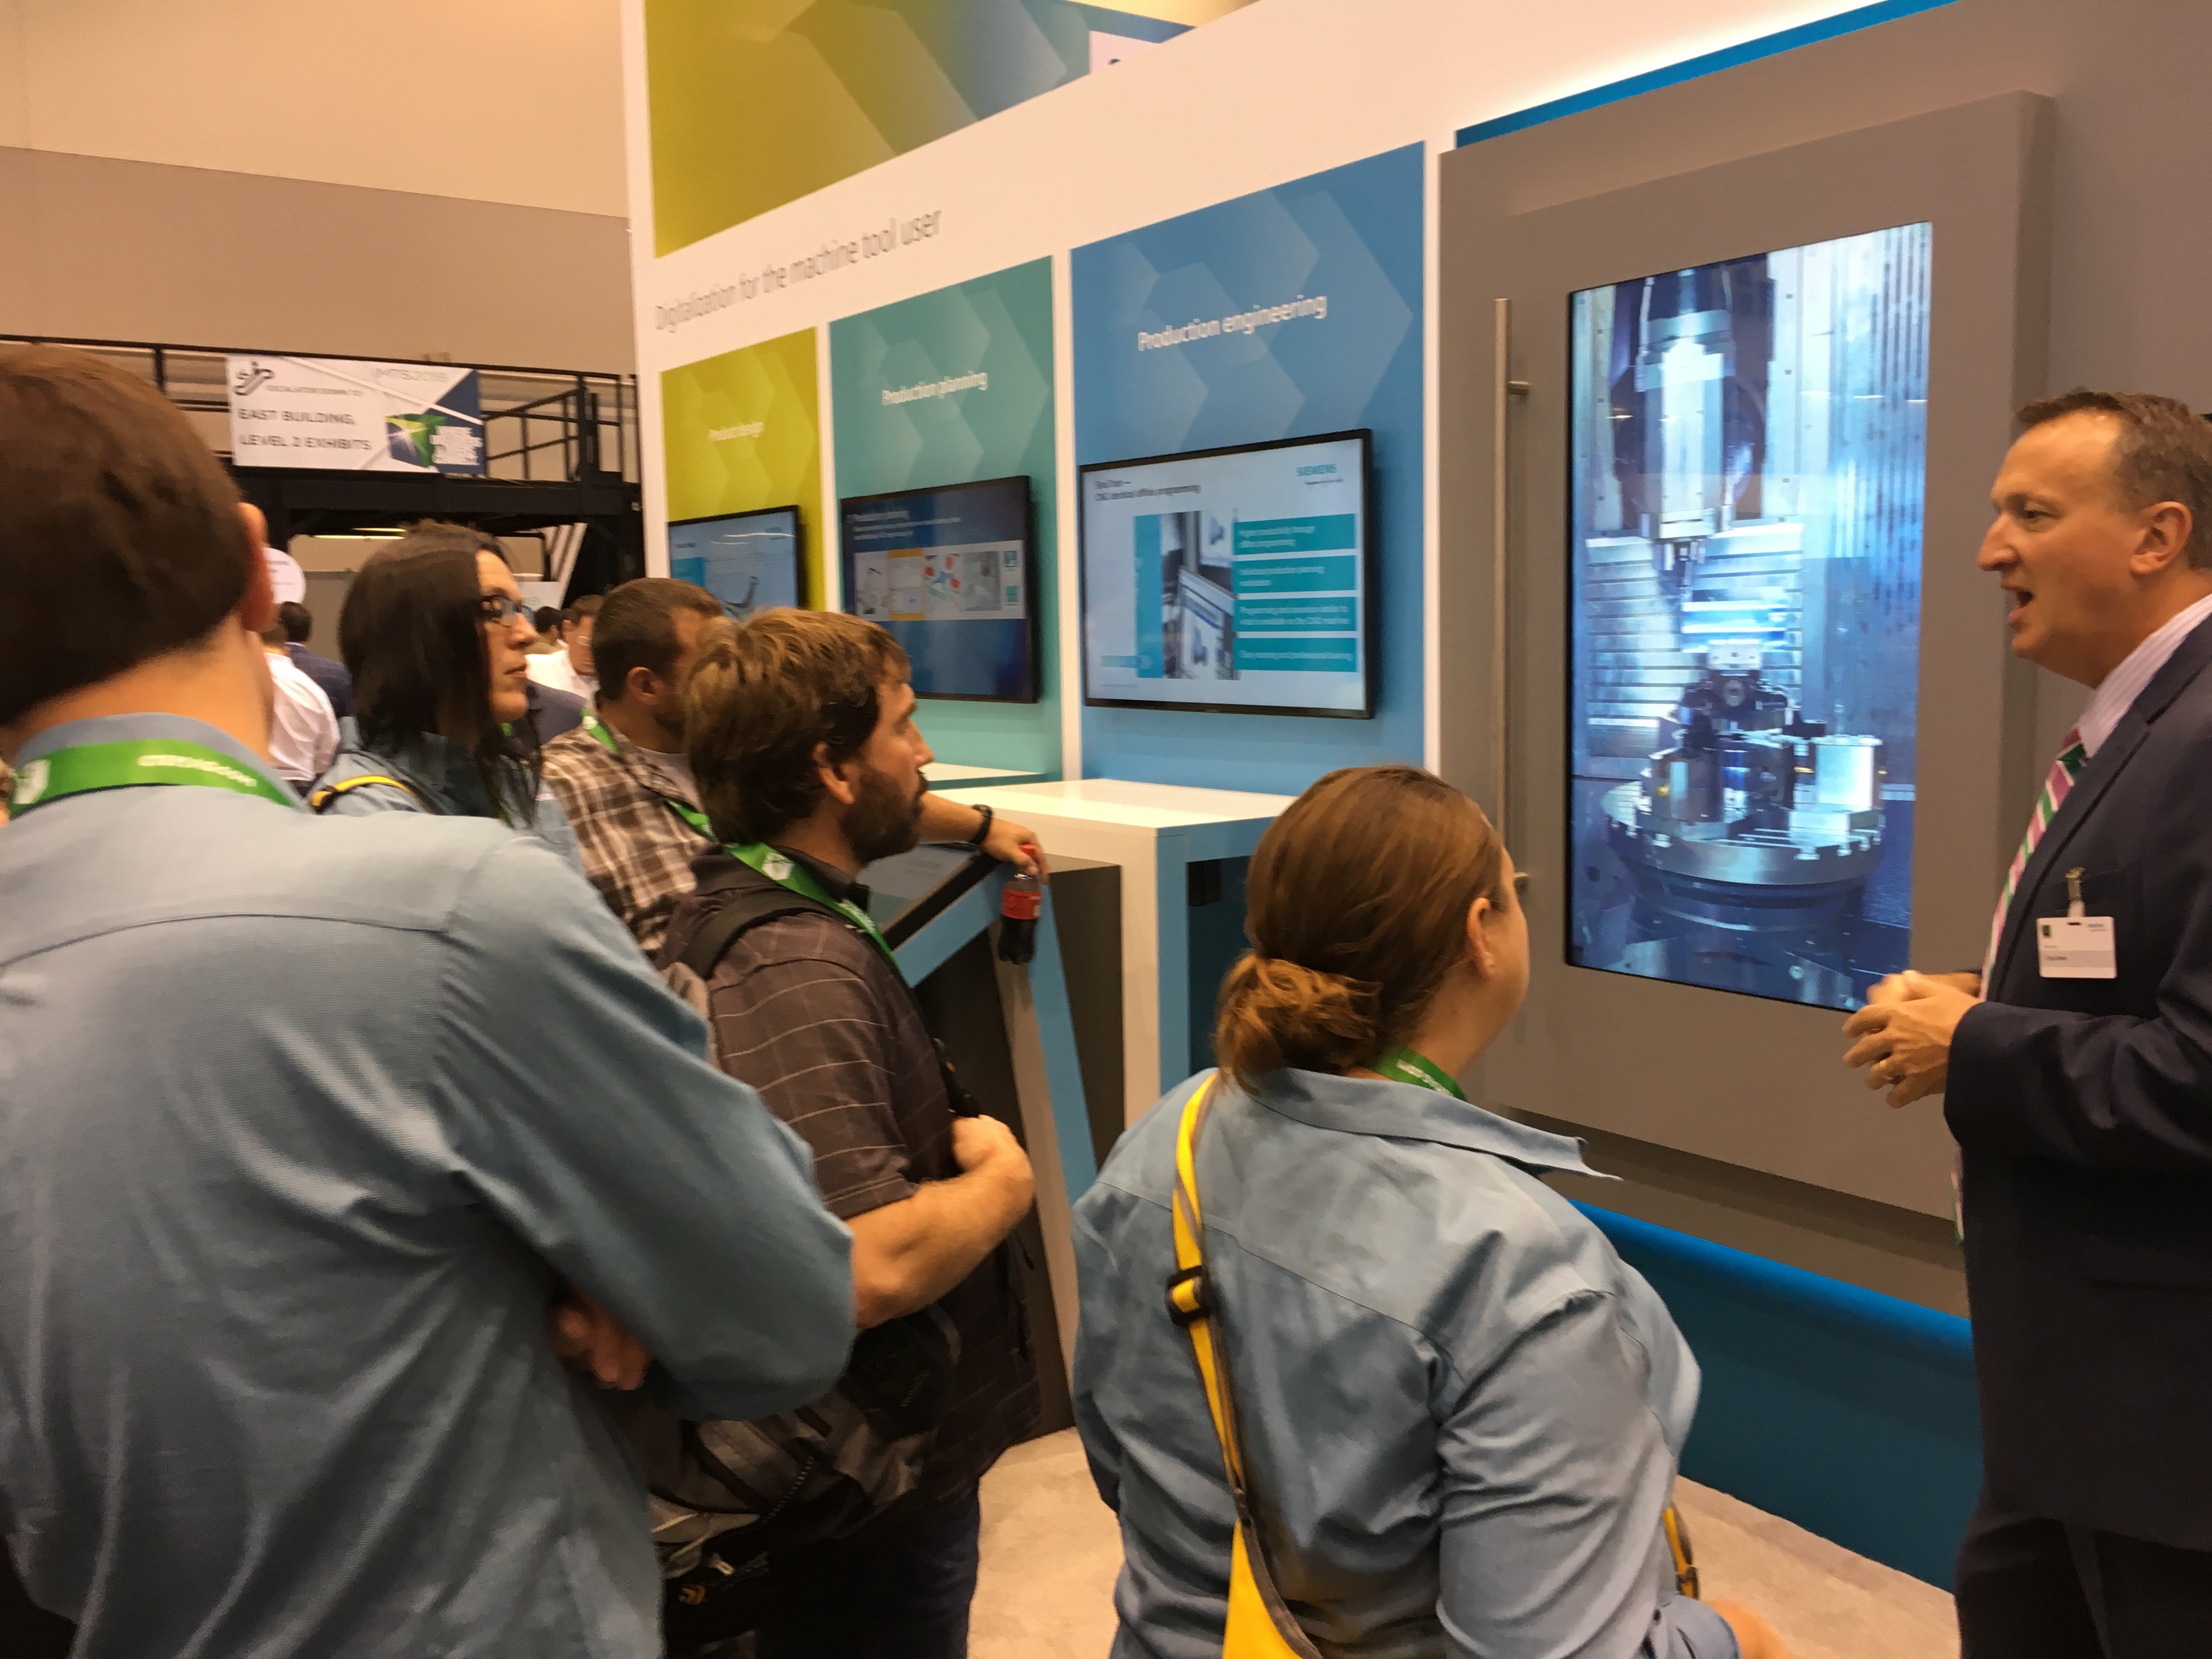 IMTS2018.Boothimage4.jpg